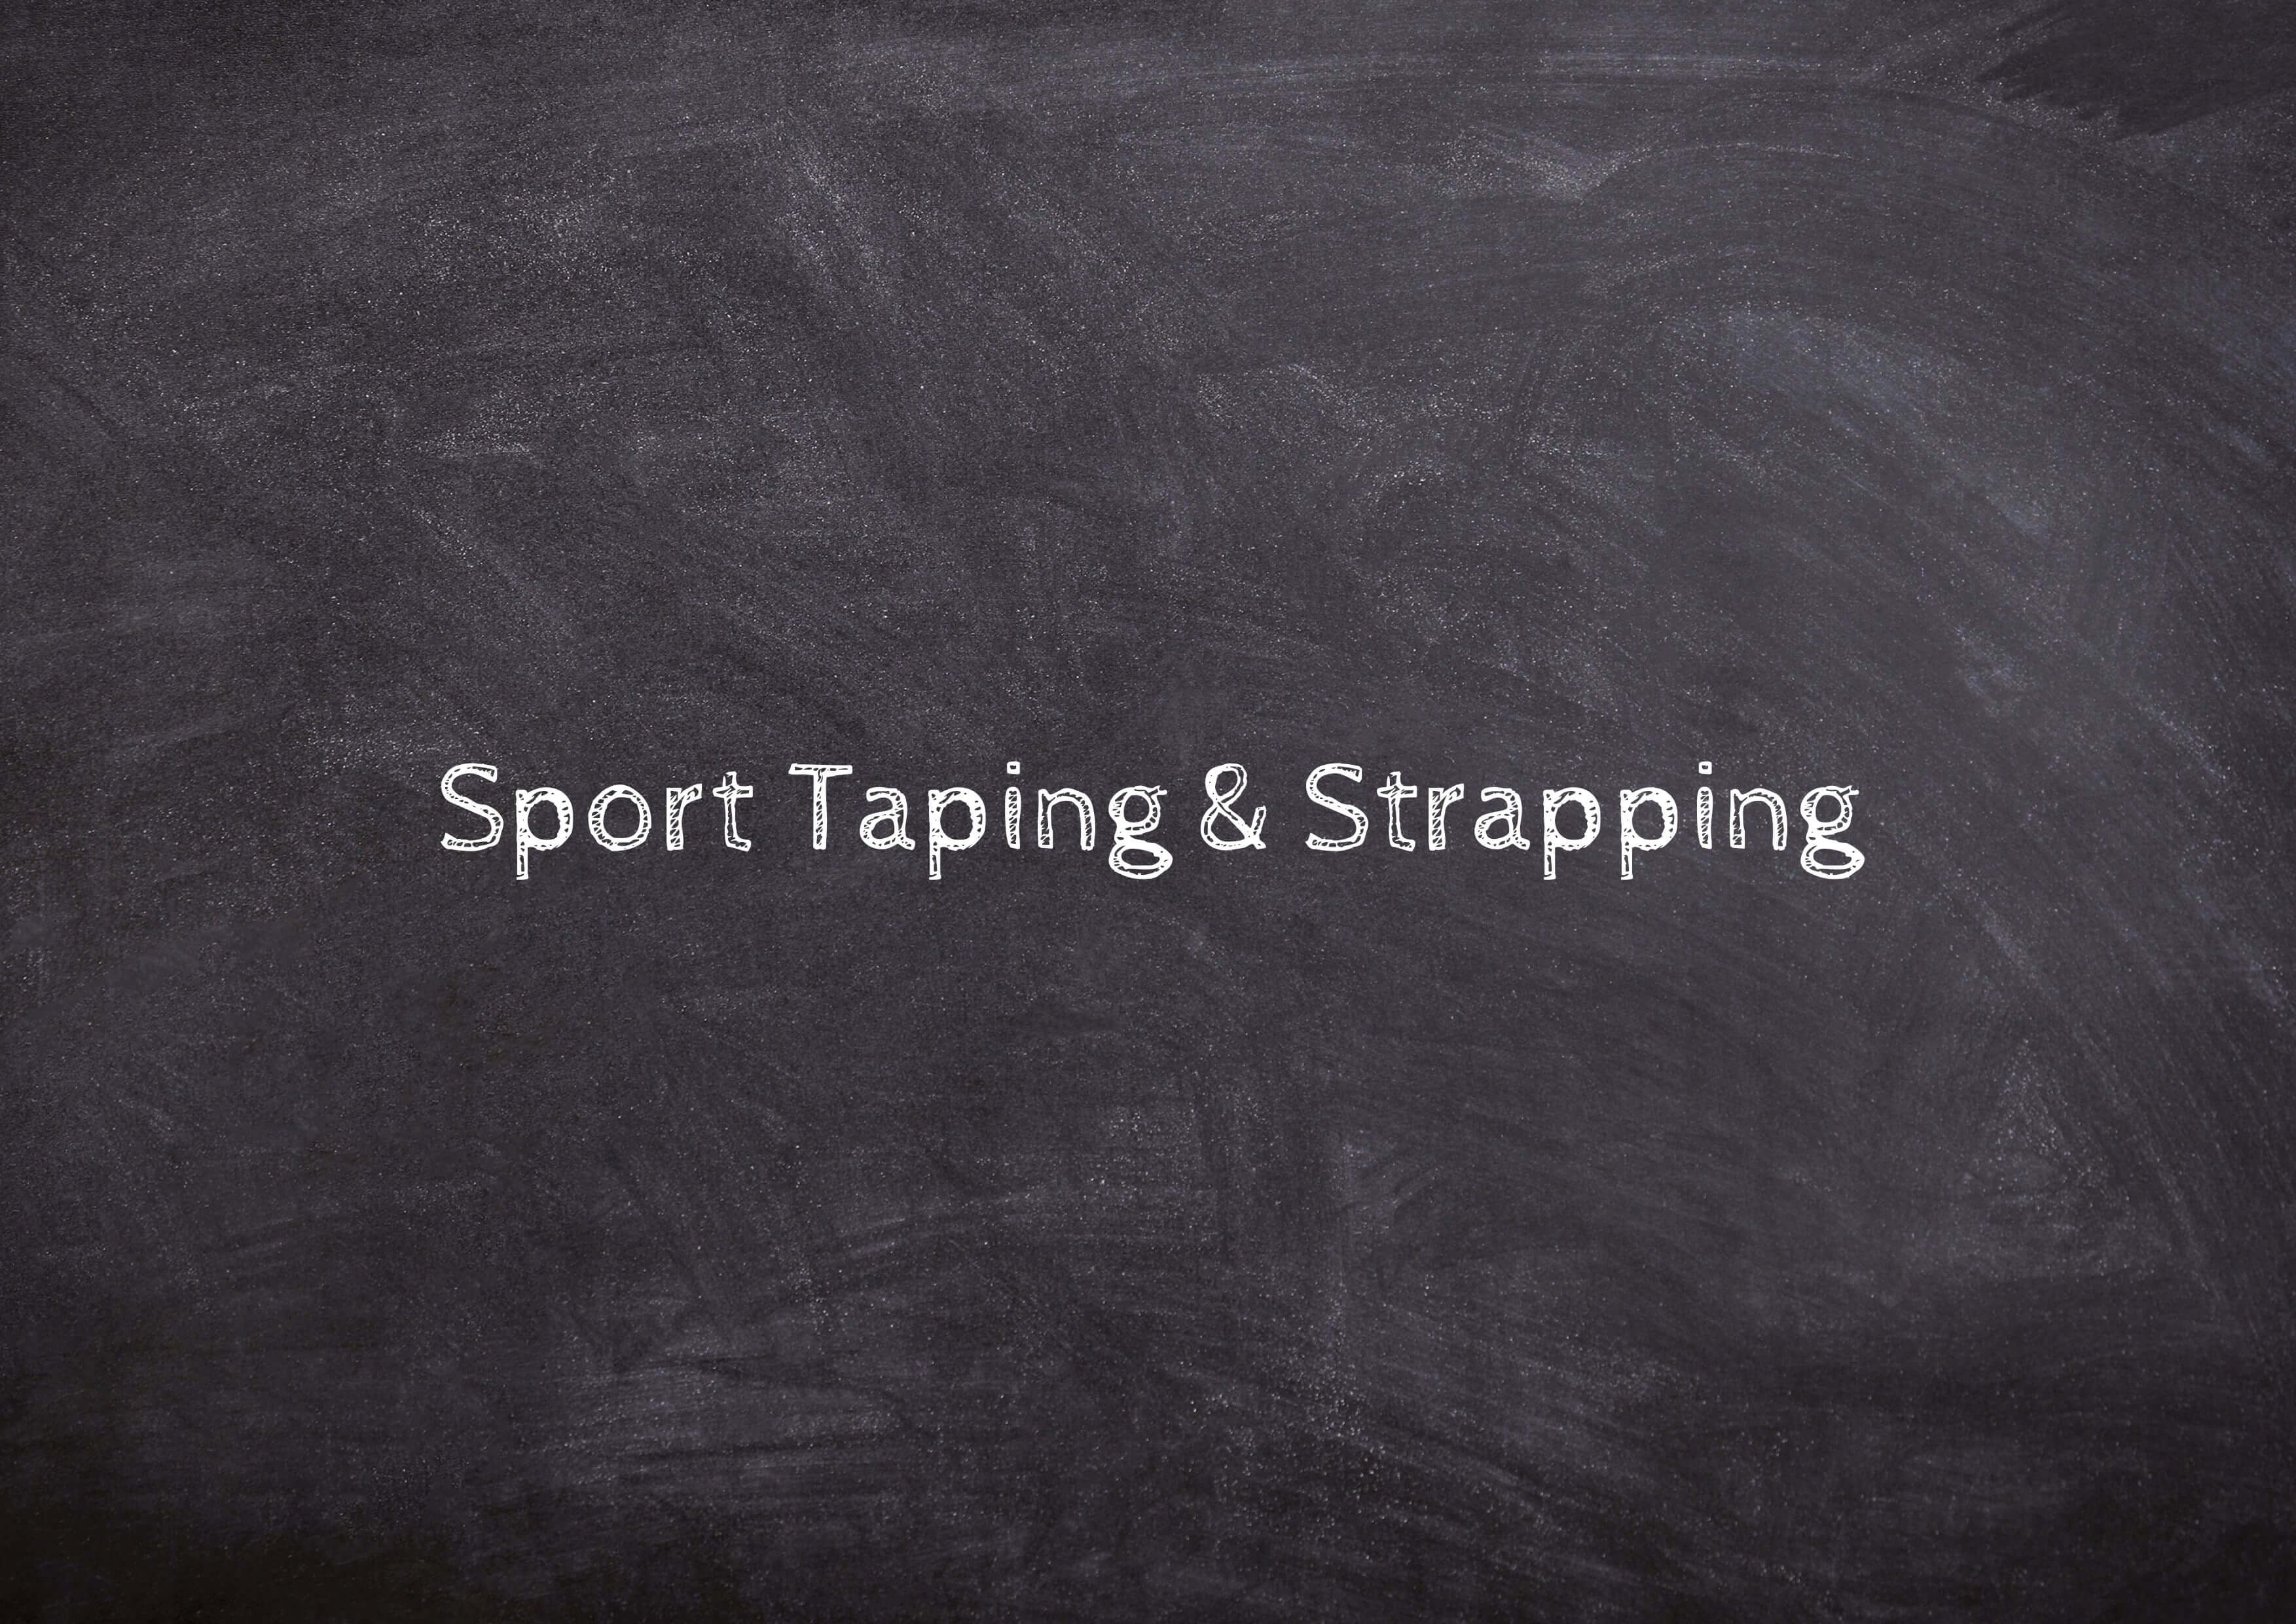 Sport Taping & Strapping text written on chalk board